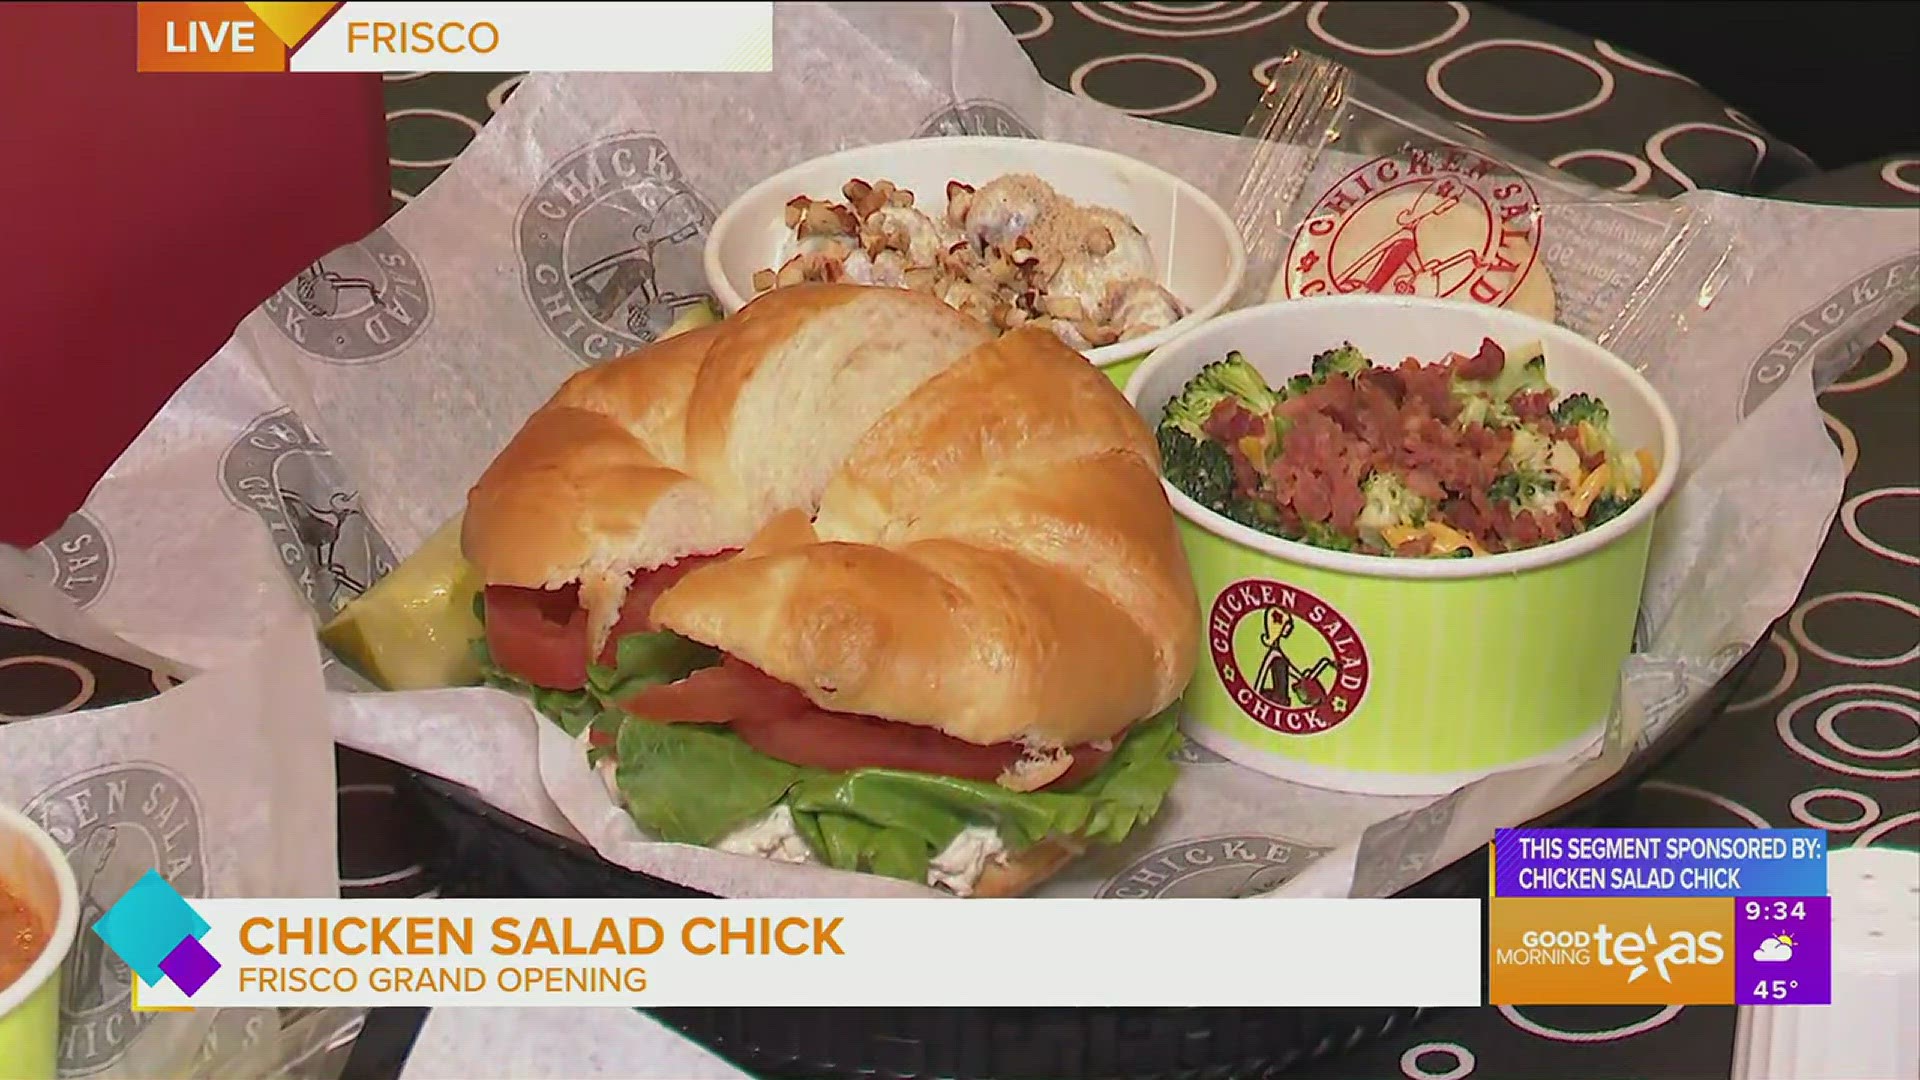 This segment is sponsored by Chicken Salad Chick.